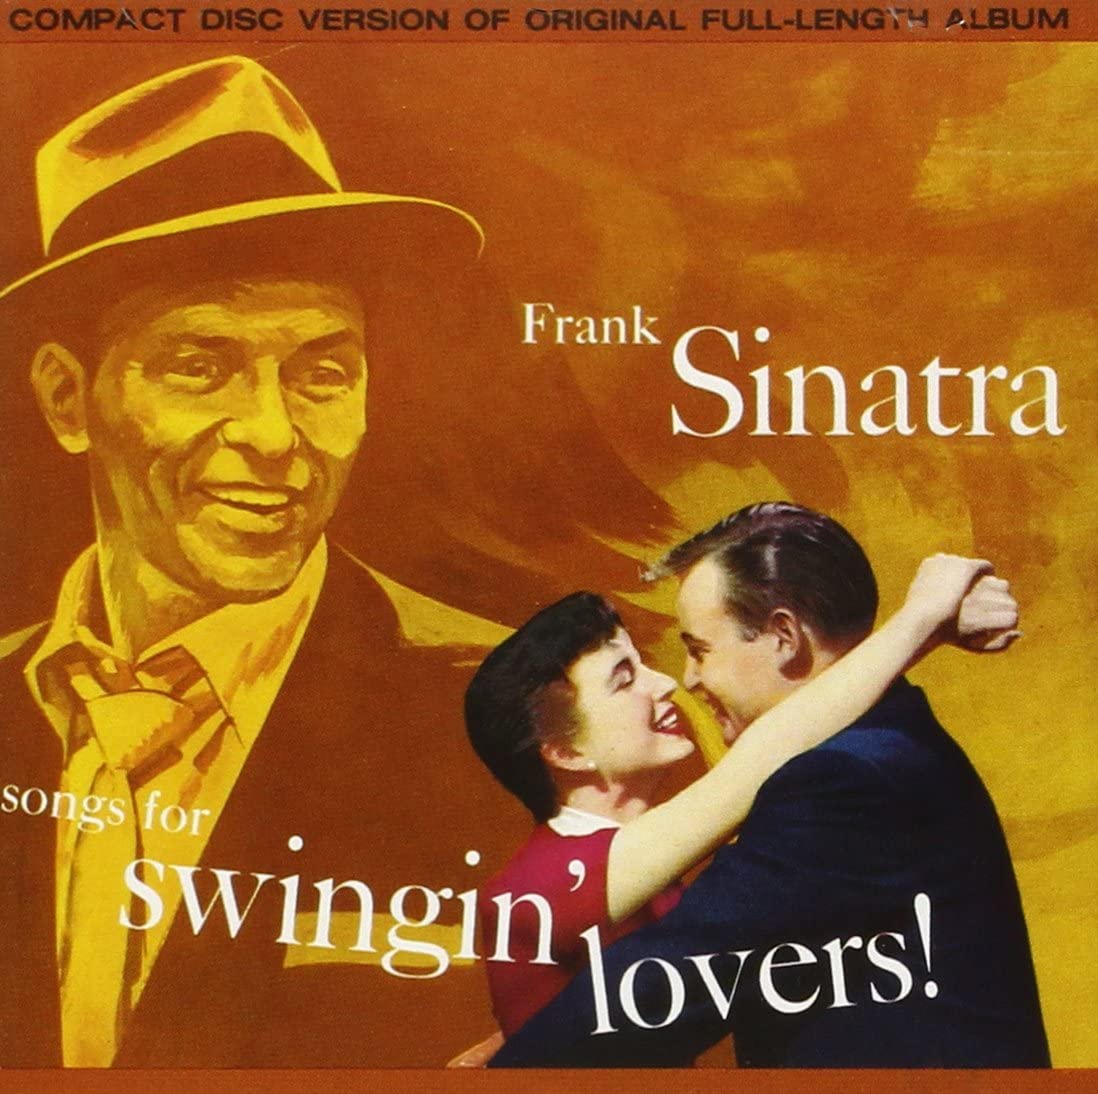 Songs for Swingin' Lovers cover - Frank Sinatra